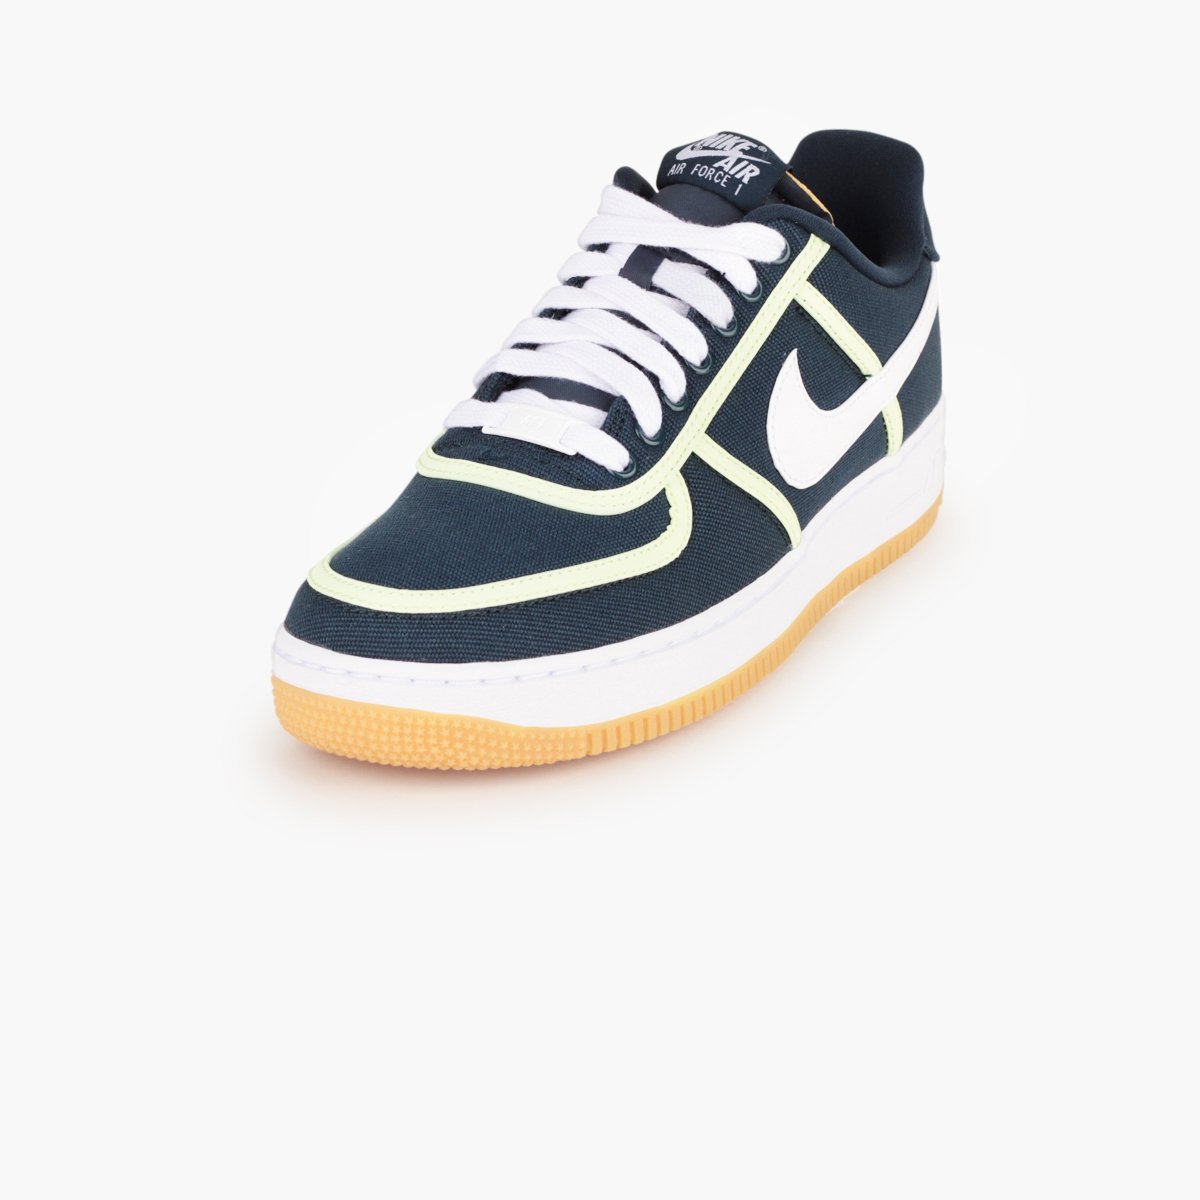 Nike Air Force 1 '07 Premium-CI9349-400-Navy-4.5 us-SUEDE Store